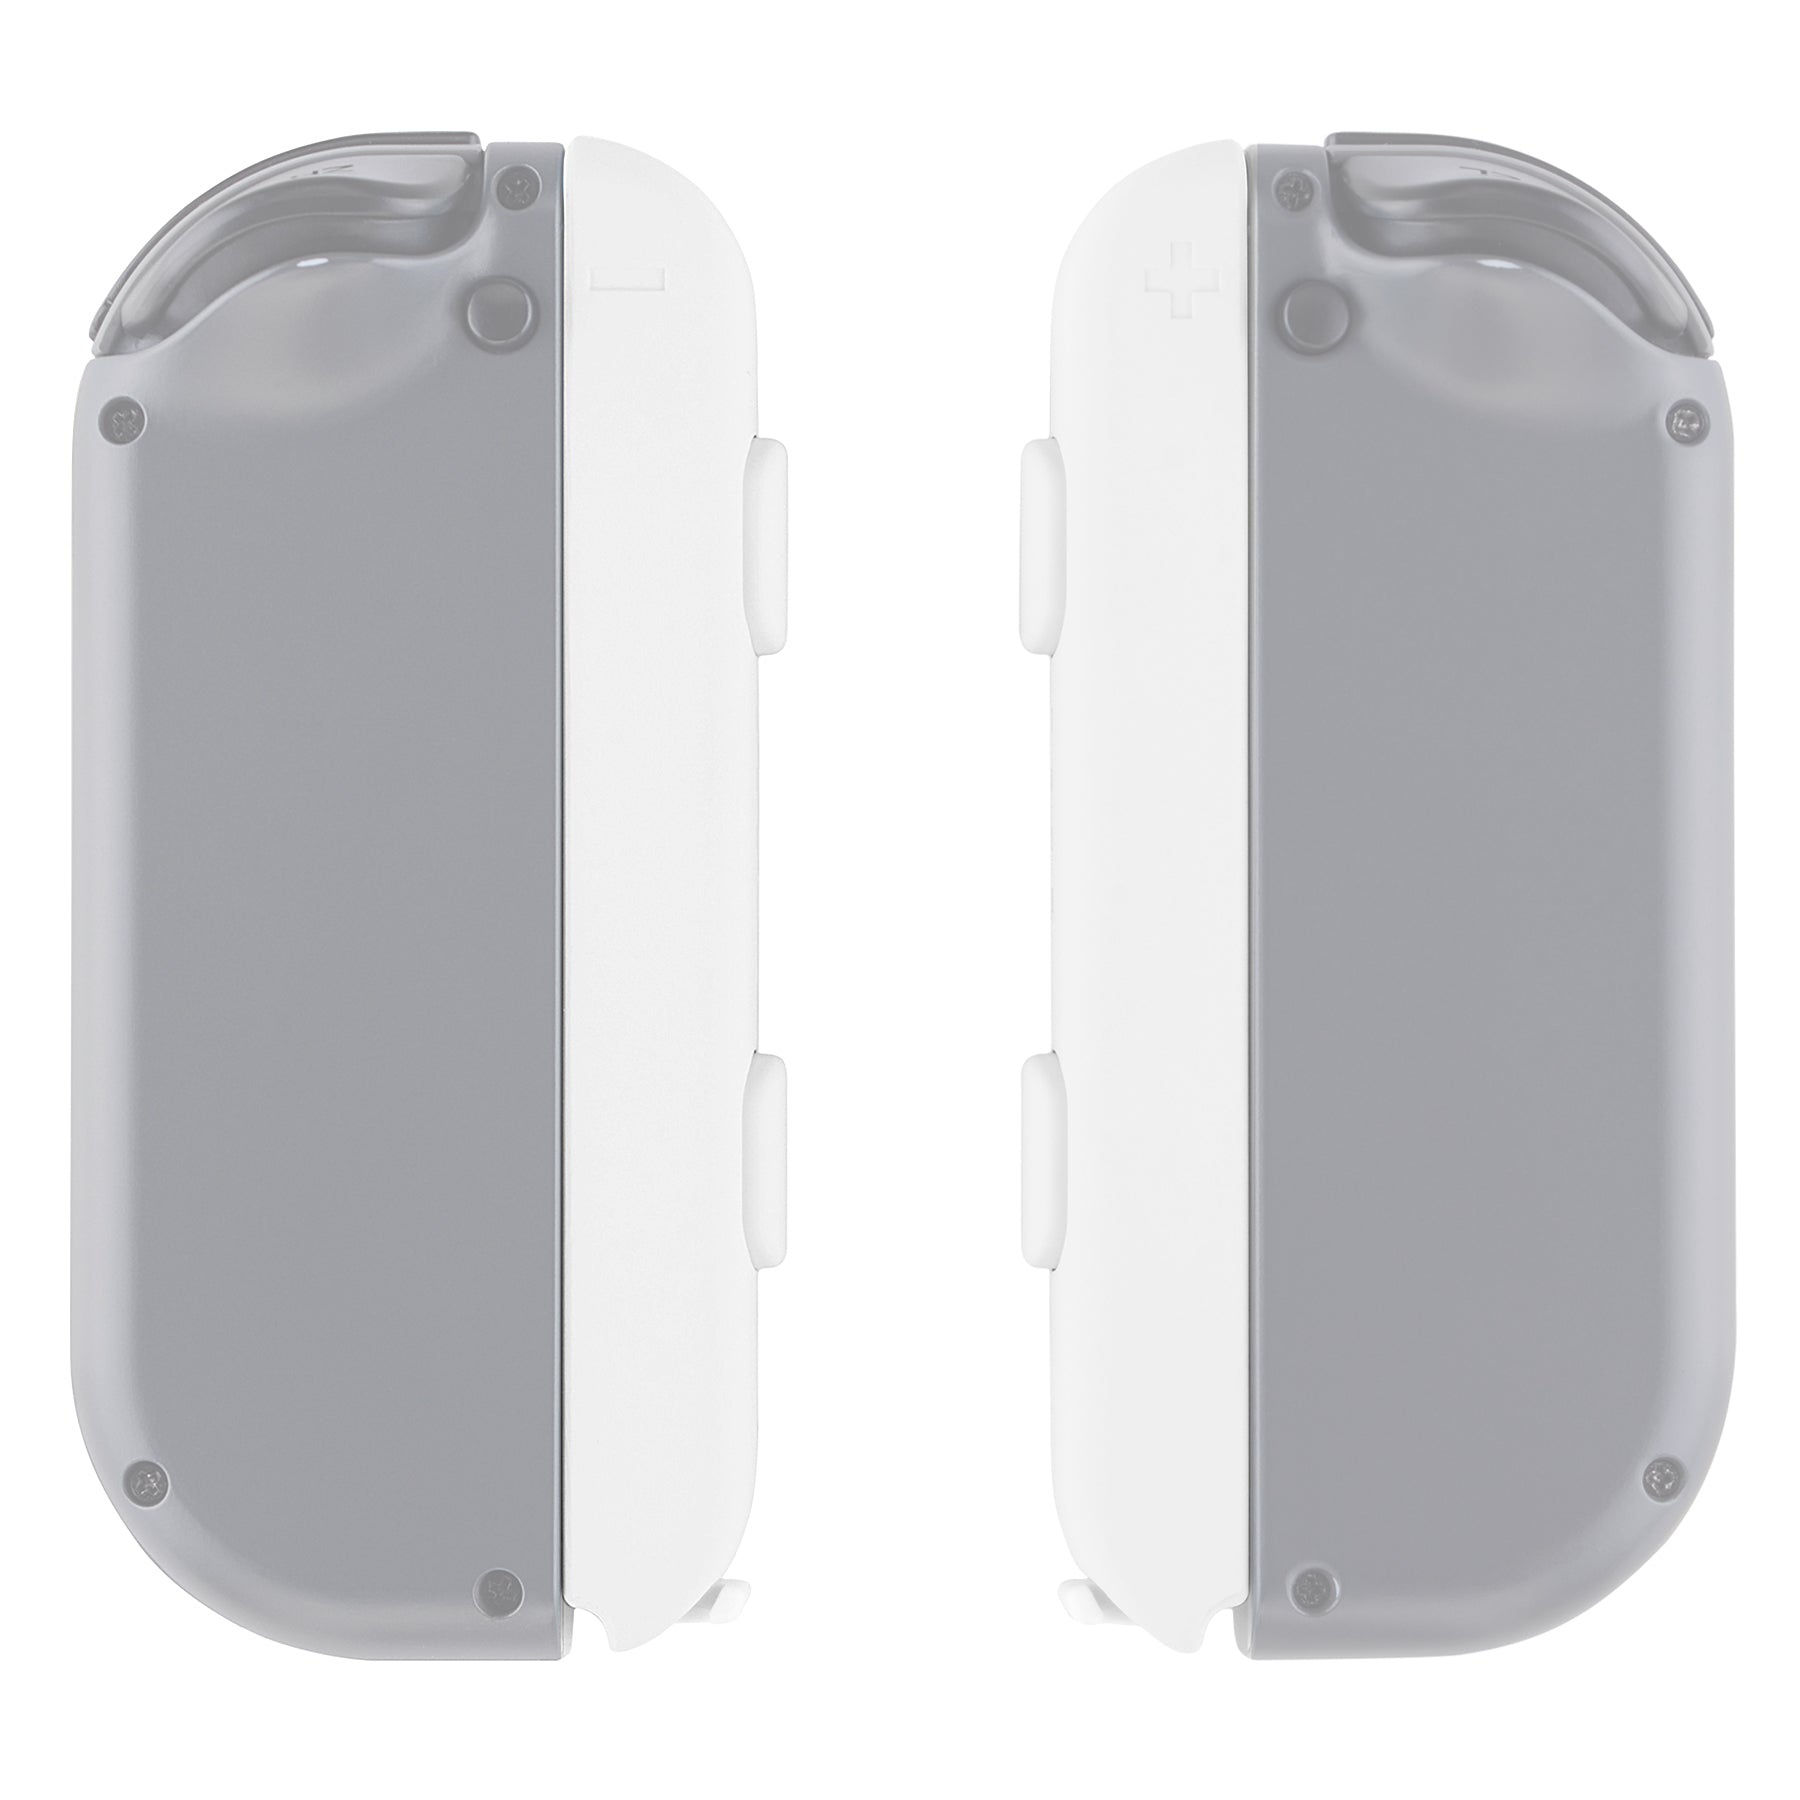 eXtremeRate Retail White Soft Touch Replacement shell for Nintendo Switch Joycon Strap, Custom Joy-Con Wrist Strap Housing Buttons for Nintendo Switch - 2 Pack - UEP303